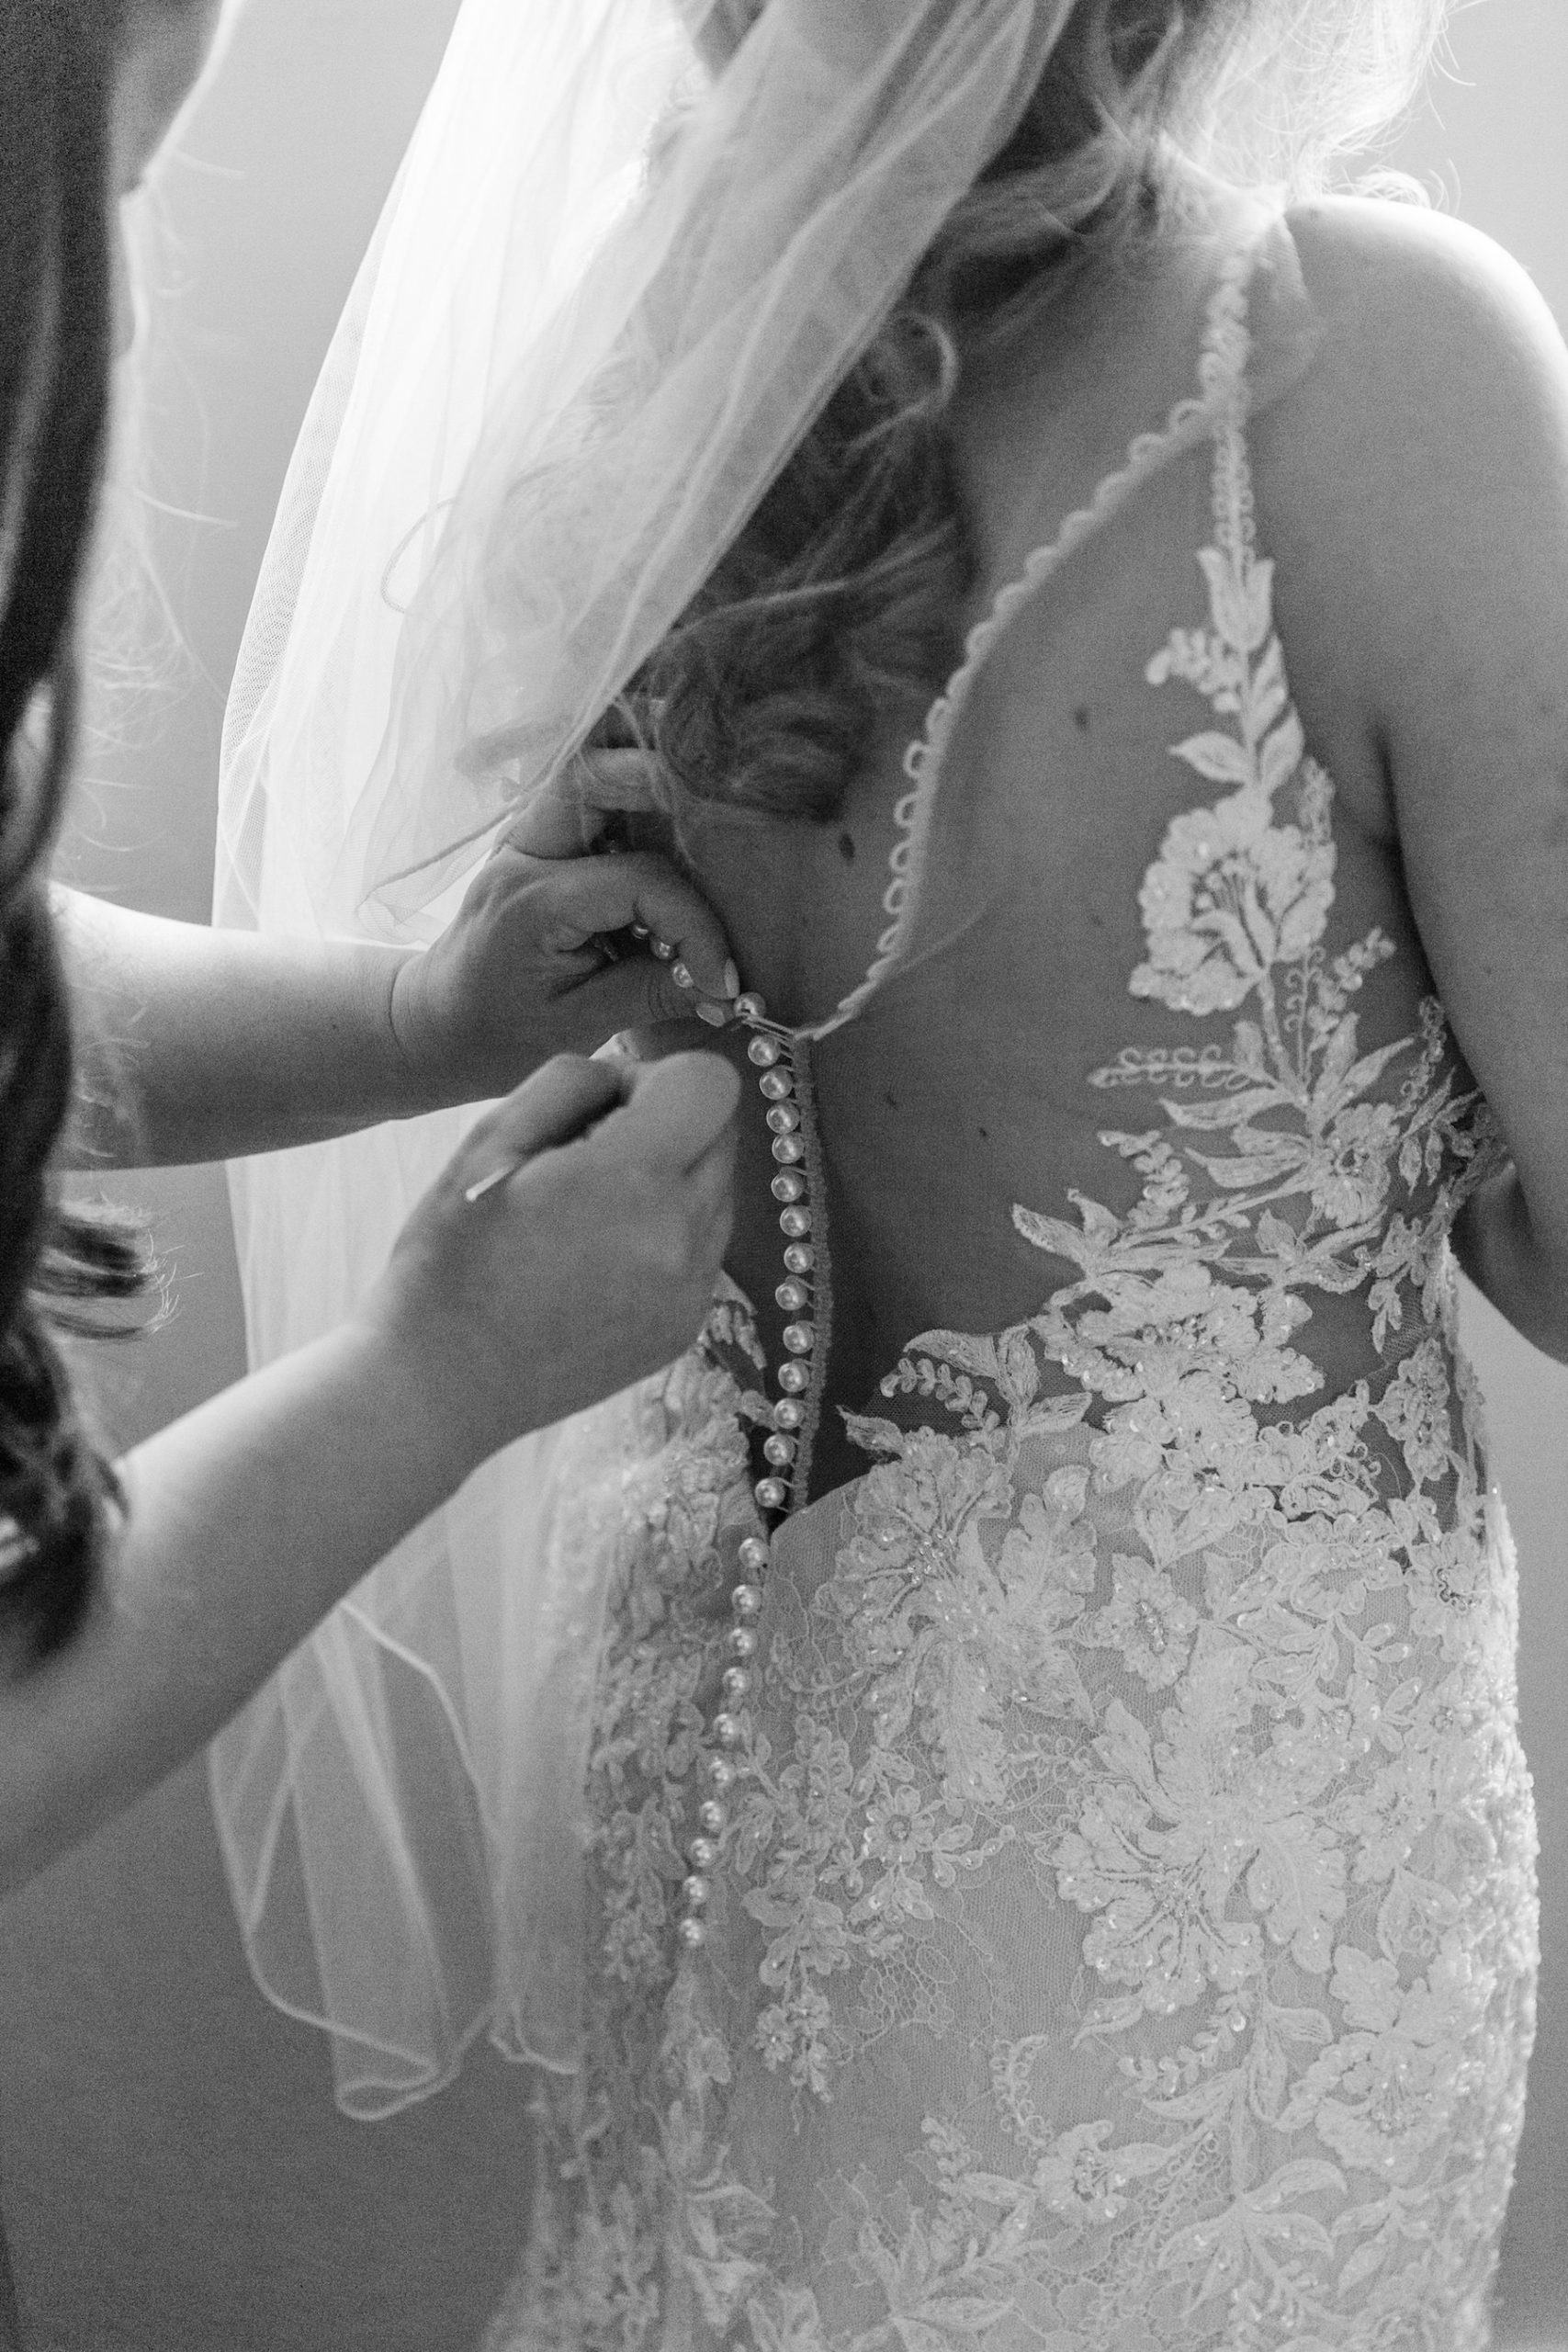 Ivory and Champagne Illusion Lace Sheath Wedding Gown by Martina Liana | Mom Helping Bride Get Dressed and Ready